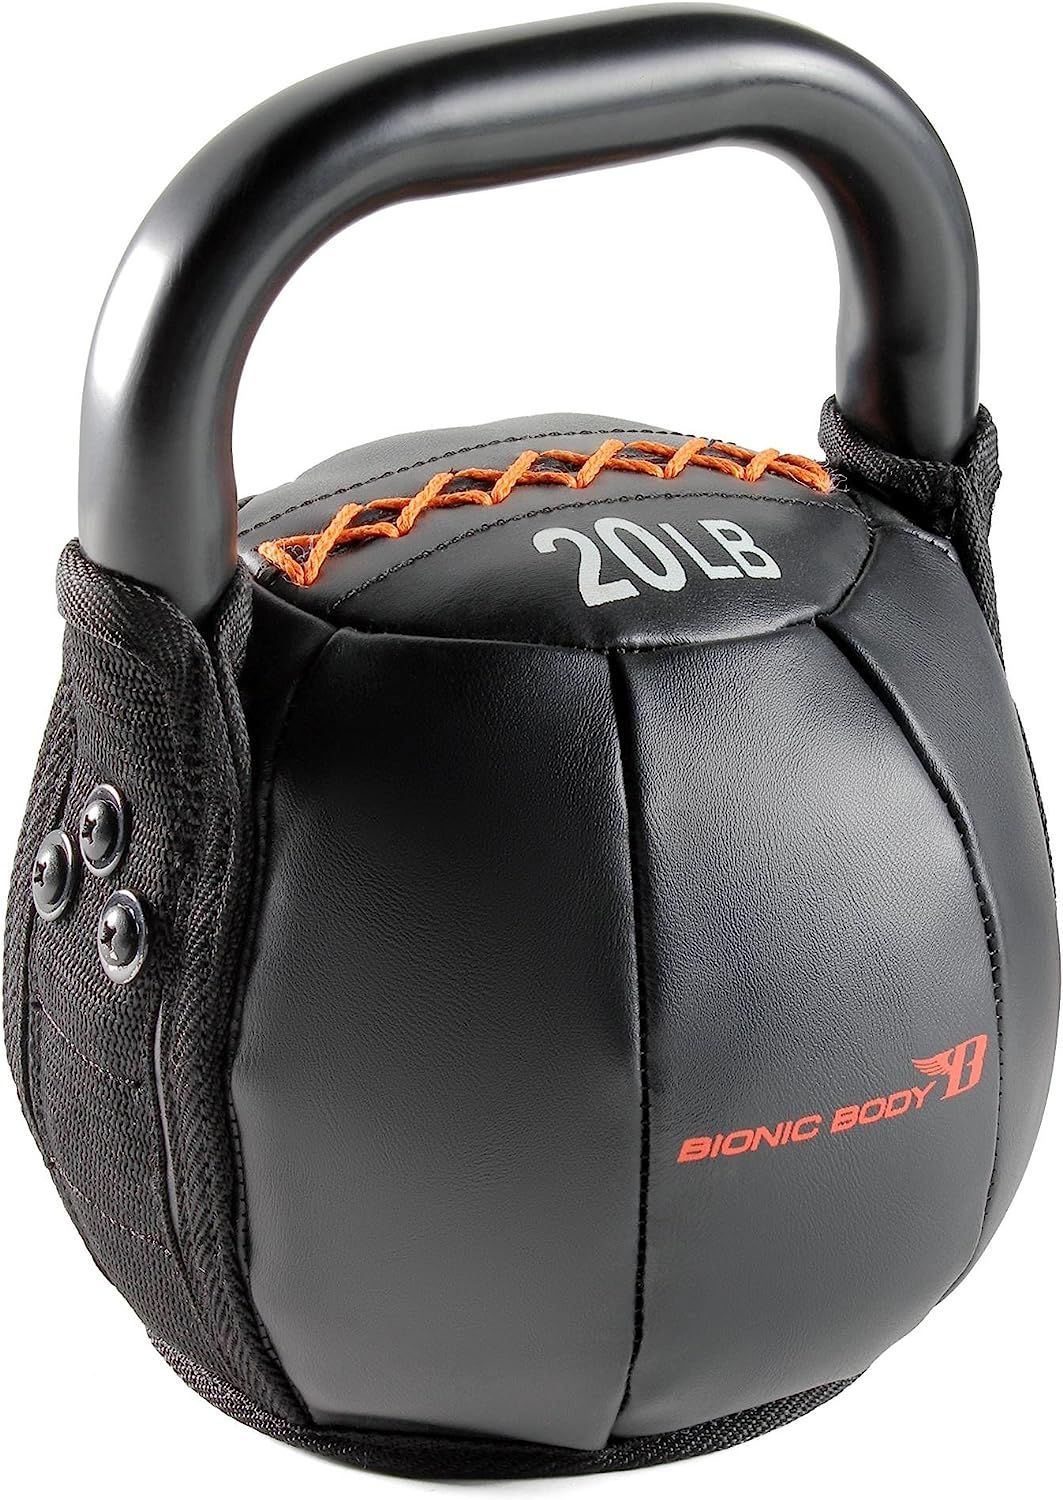 Bionic Body Soft Kettlebell with Handle - 10, 15, 20, 25, 30, 35, 40 lb. for Weightlifting, Condi... | Amazon (US)